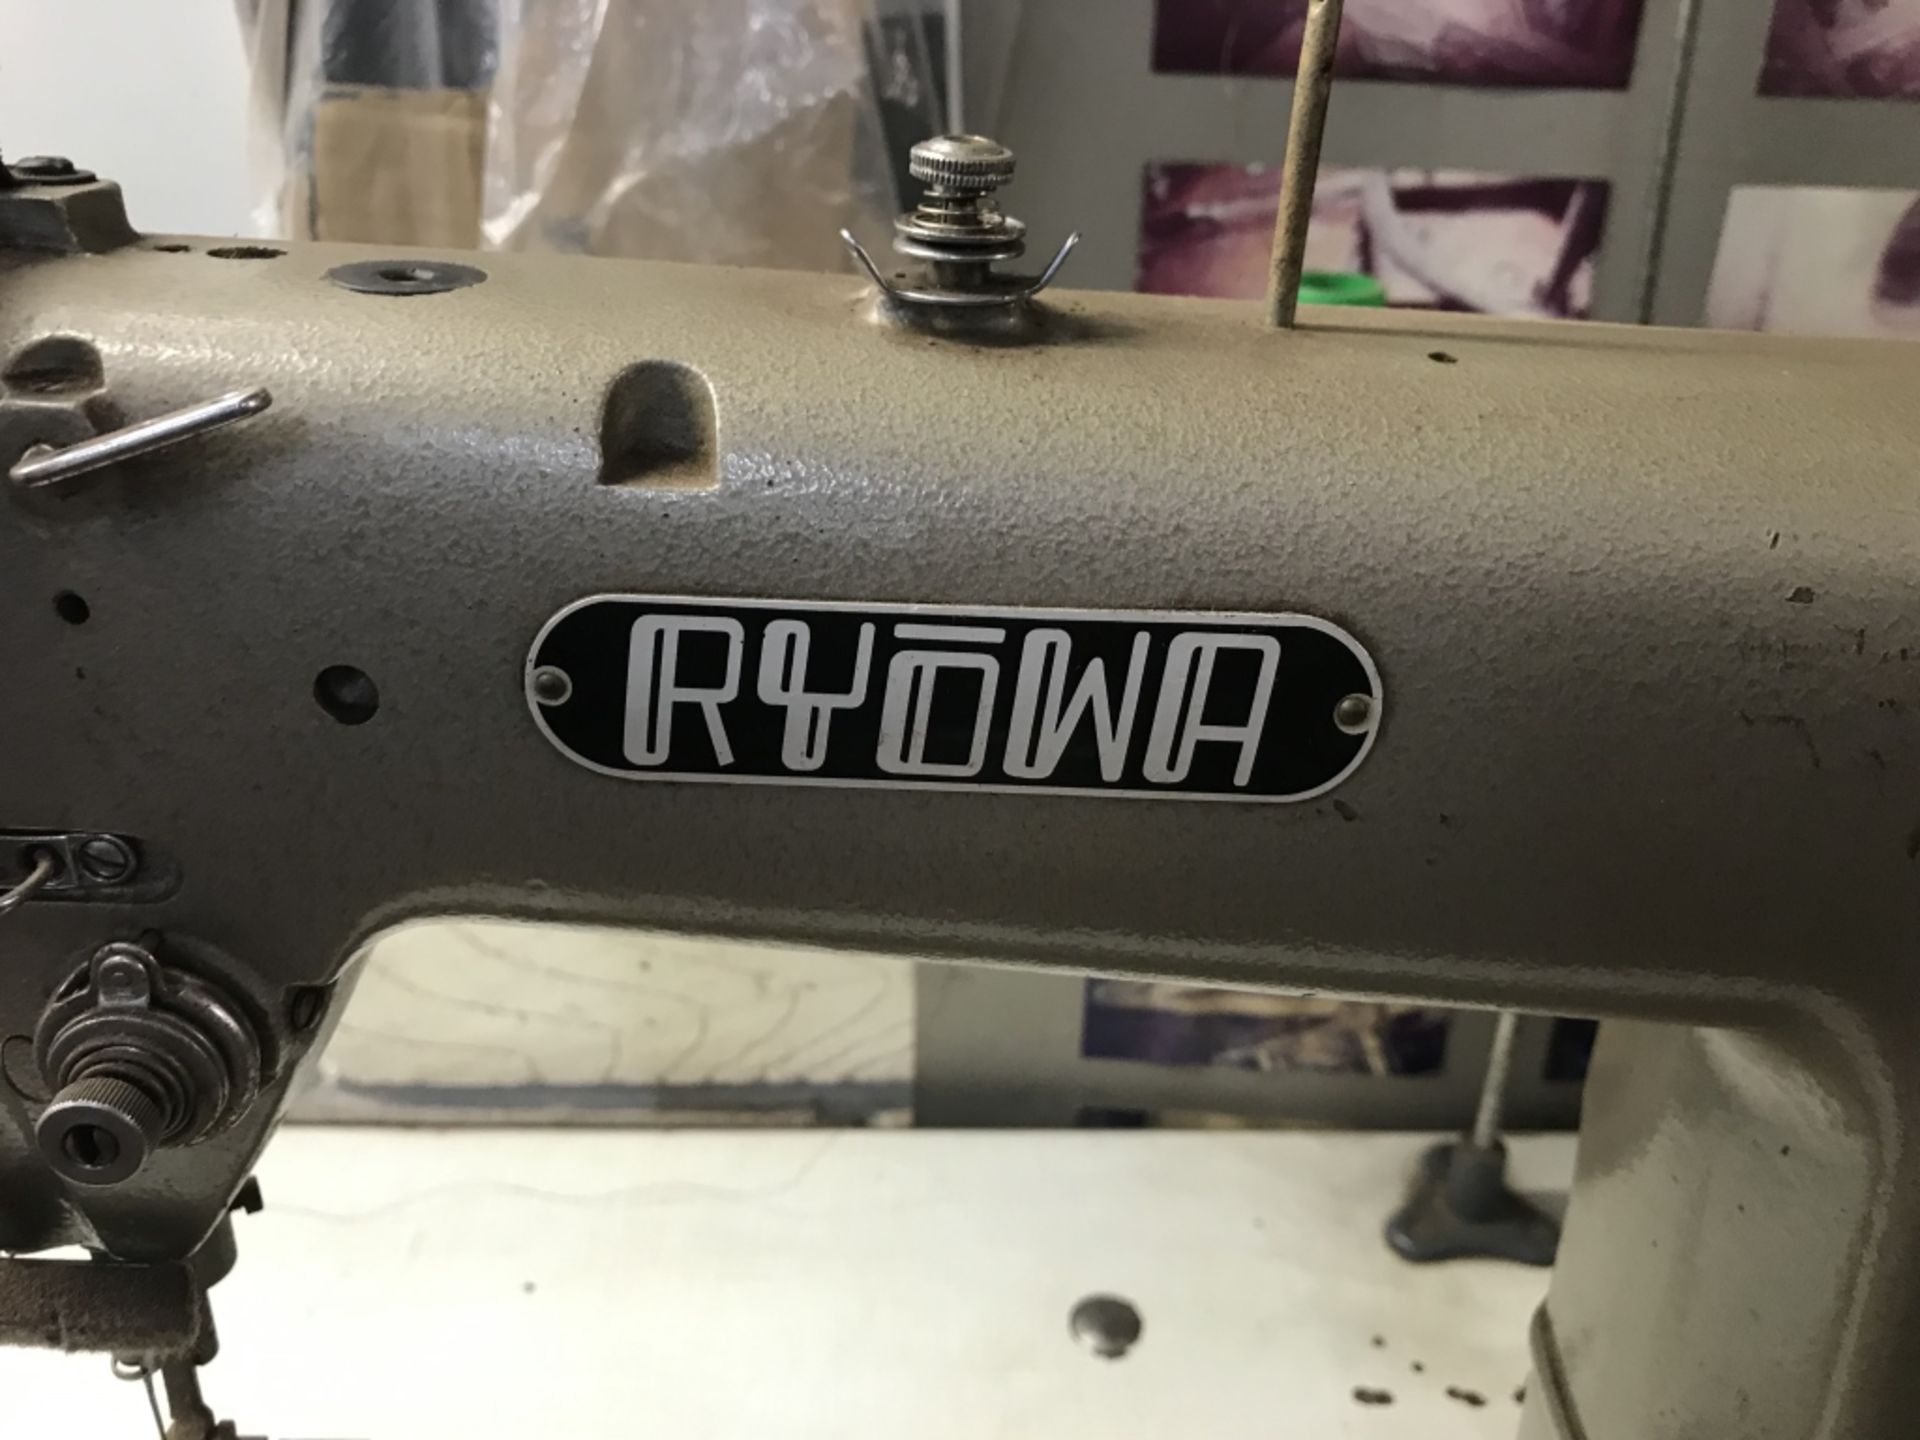 Ryowa NW-500 industrial Post Sewing Machine - Image 5 of 7